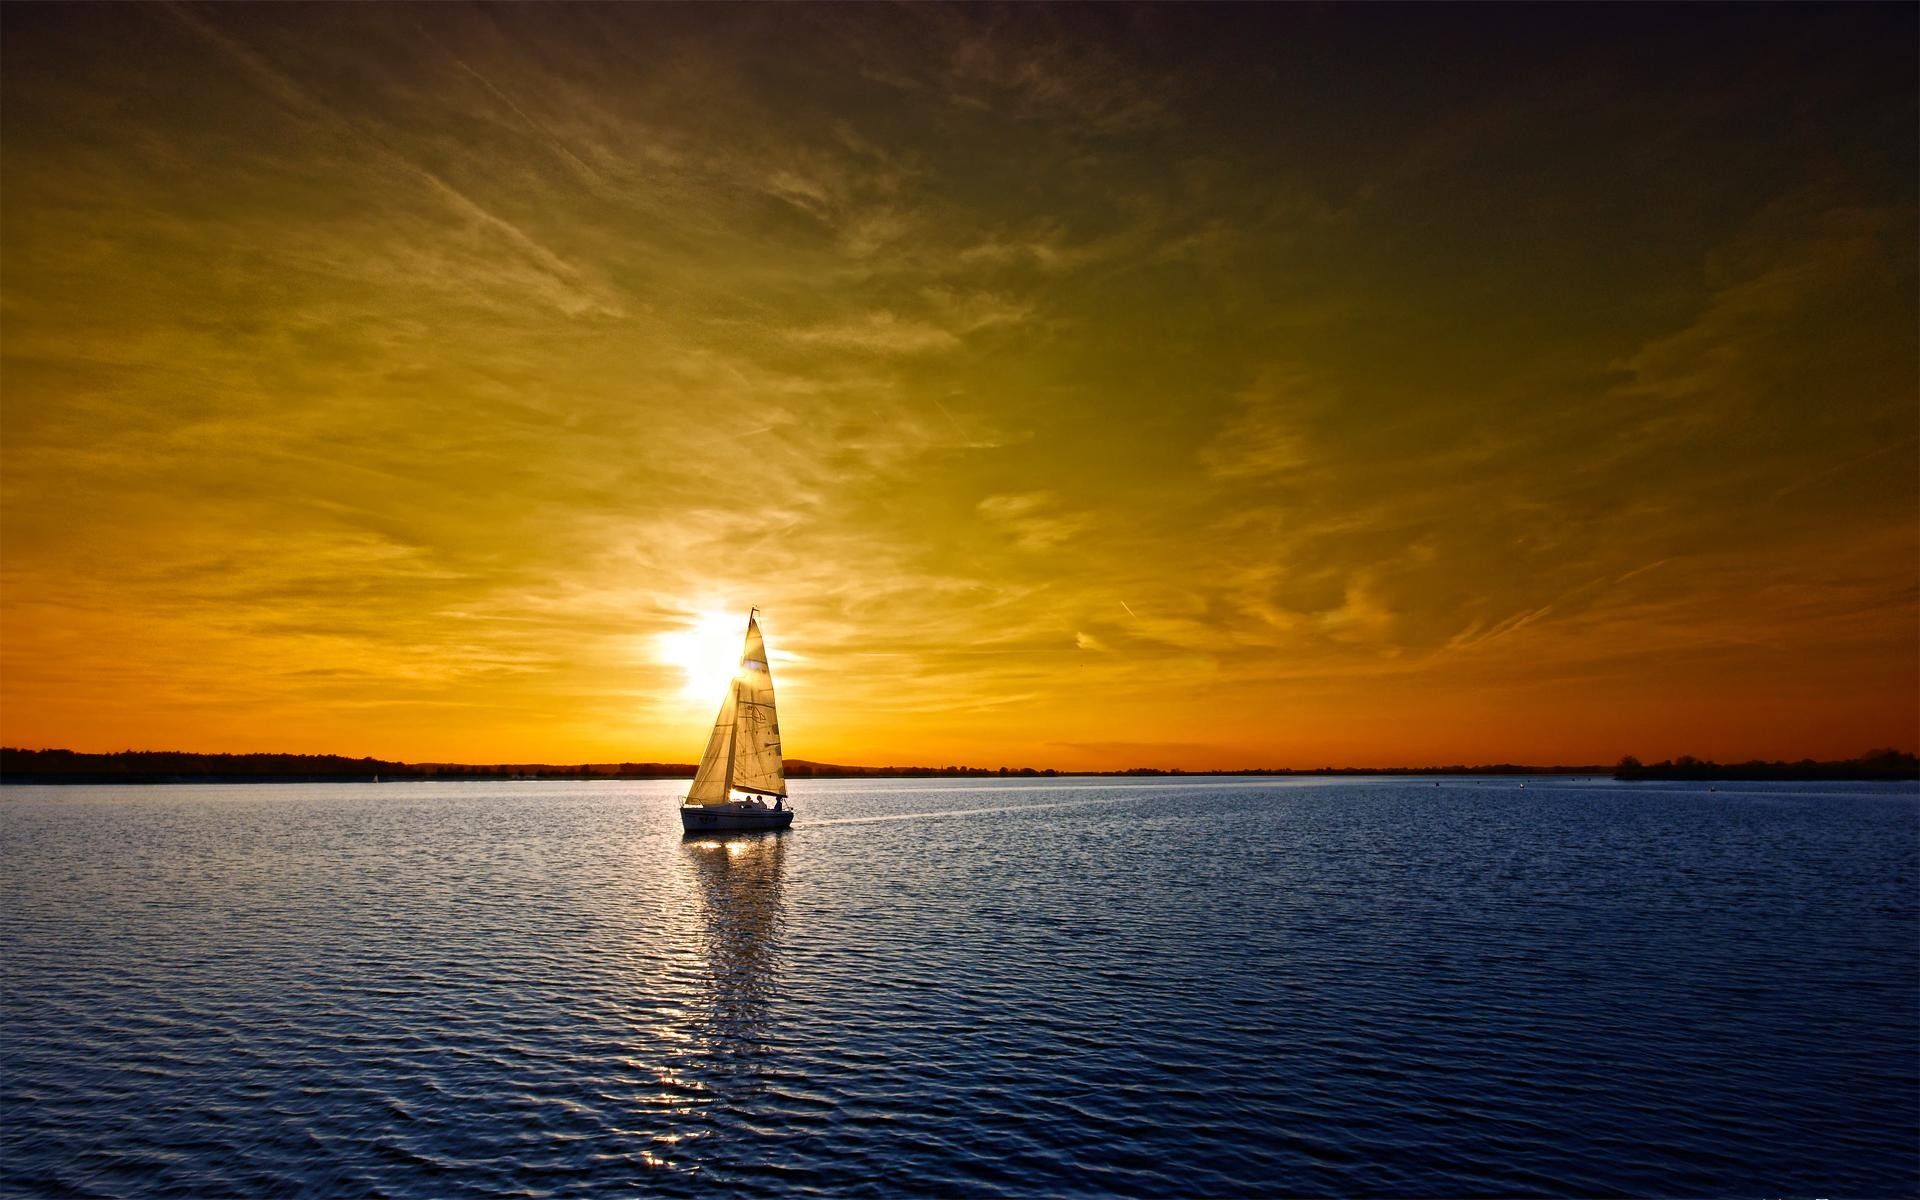 Boat In The Sea At Sunset Wallpaper - Boat In The Sea , HD Wallpaper & Backgrounds